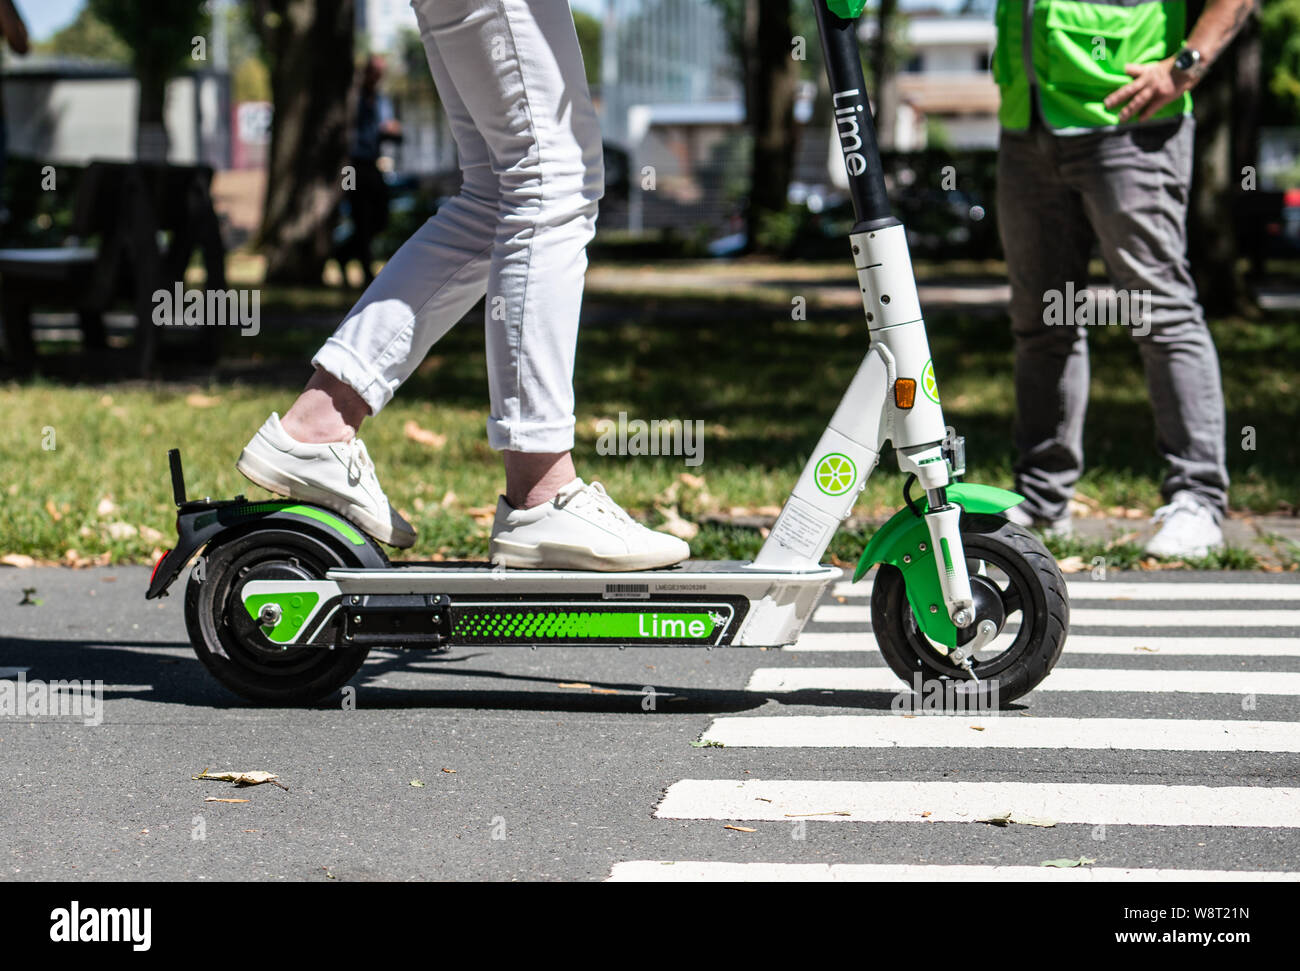 Eschborn, Germany. 11th 2019. During a driving safety training for electric pedal-scooters, a participant practices emergency braking on a pedestrian crossing at a traffic training area. One of the e-scooter providers